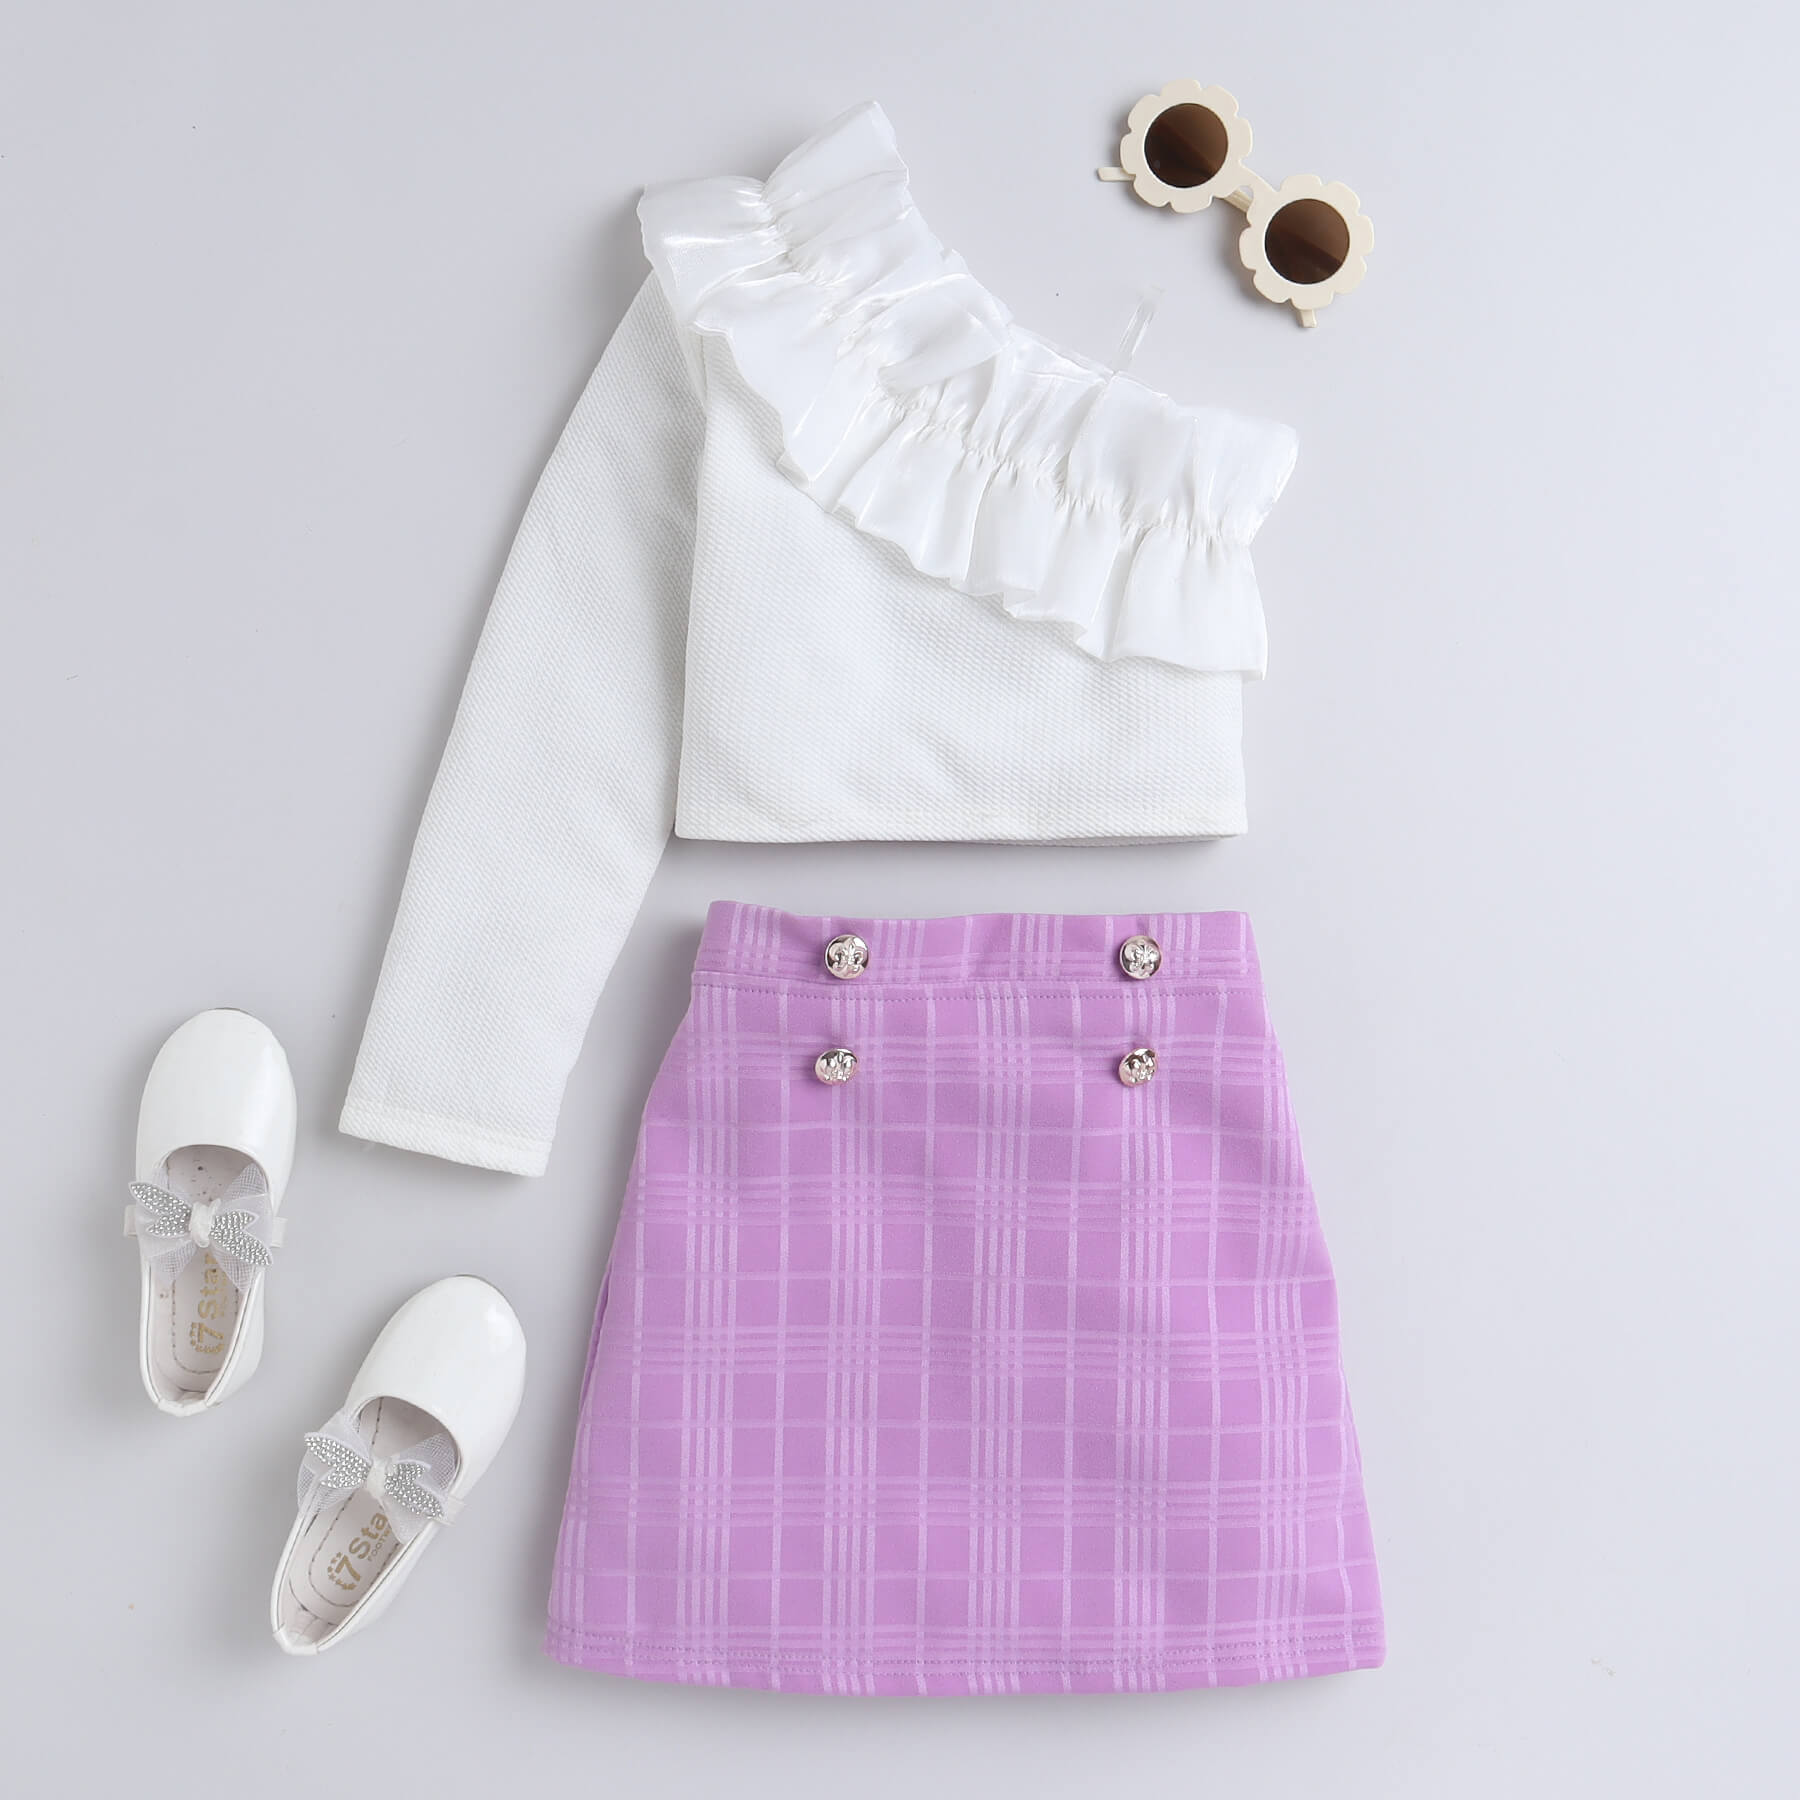 Taffykids full sleeve one shoulder ruffle detail party crop top and checks button detail skirt set-White/Purple